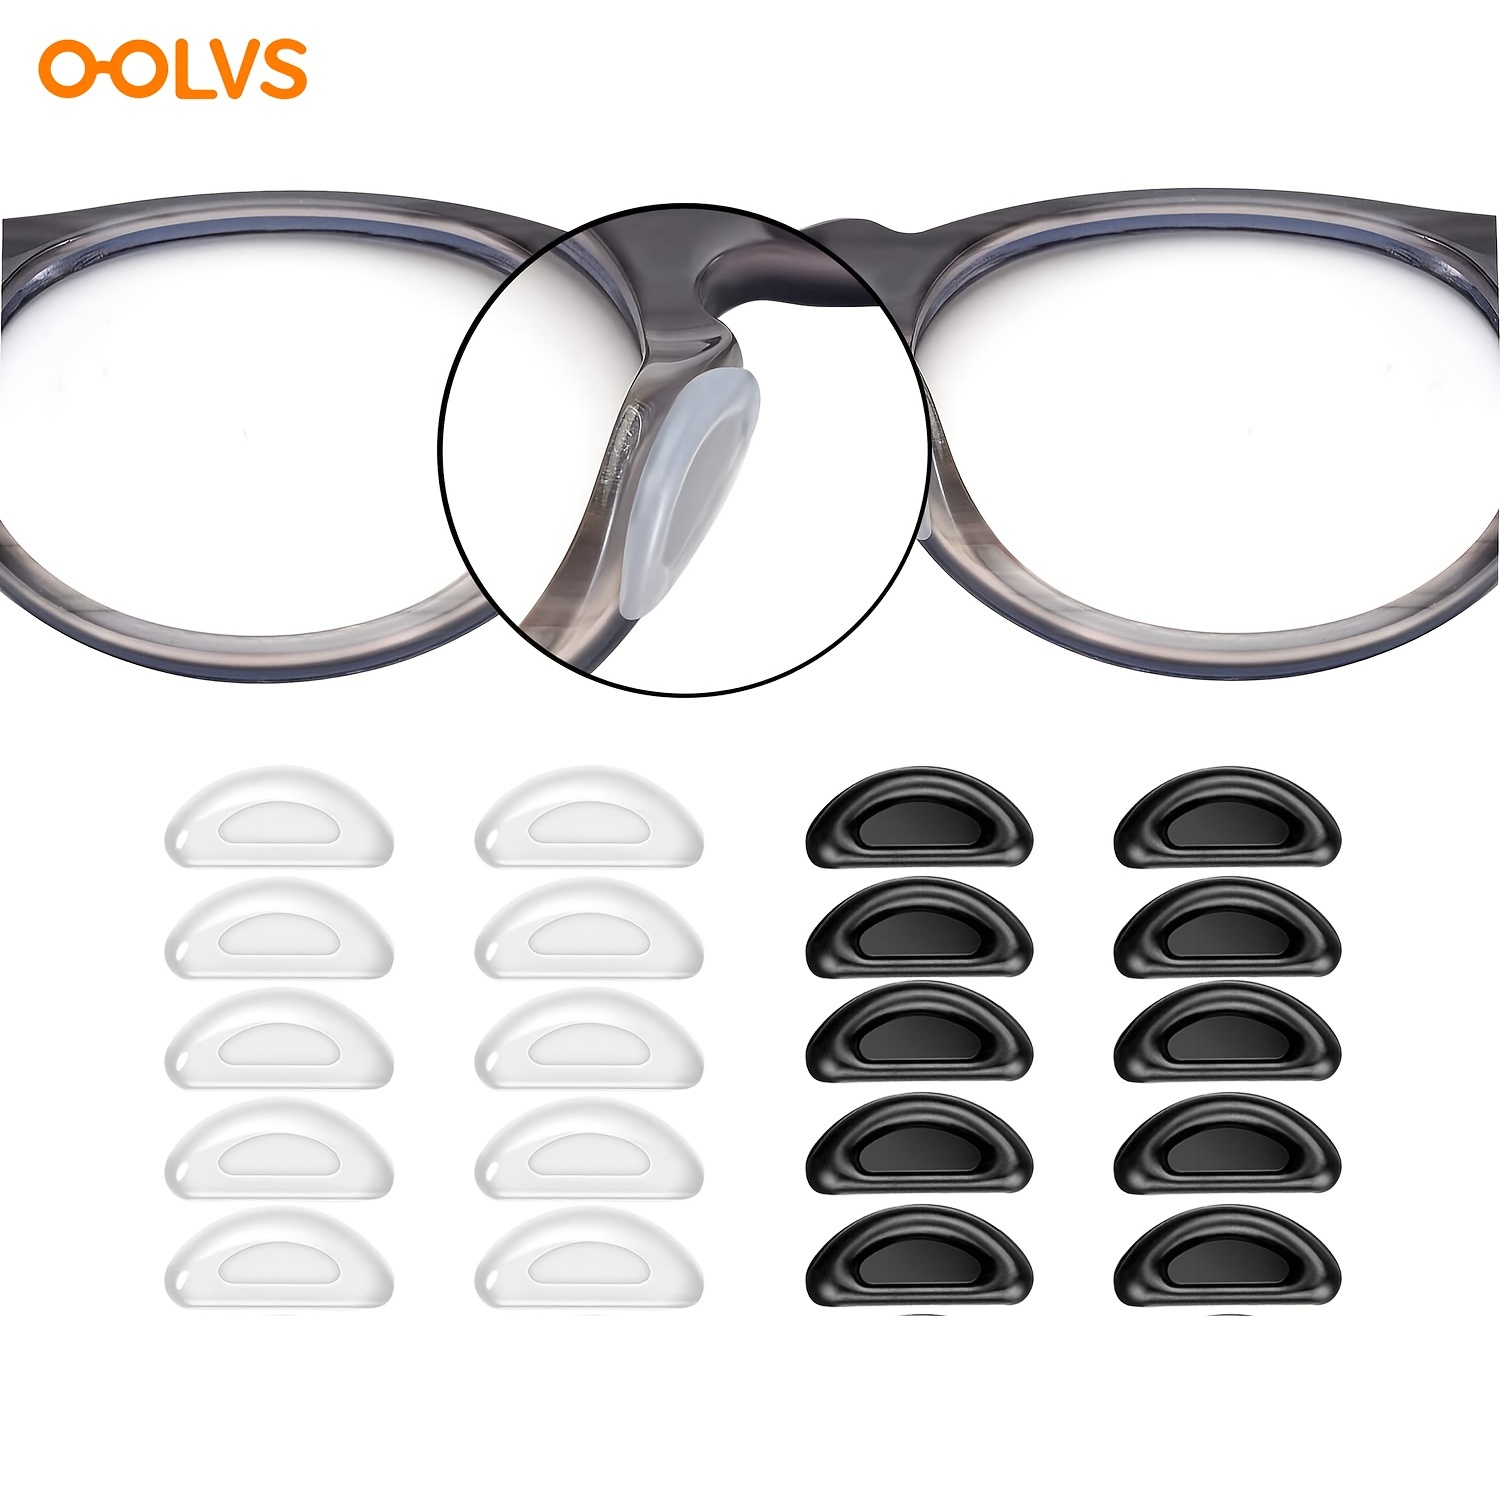 Of Anti Slip Silicone Nose Pads For Eyeglasses, Clip On Sunglasses